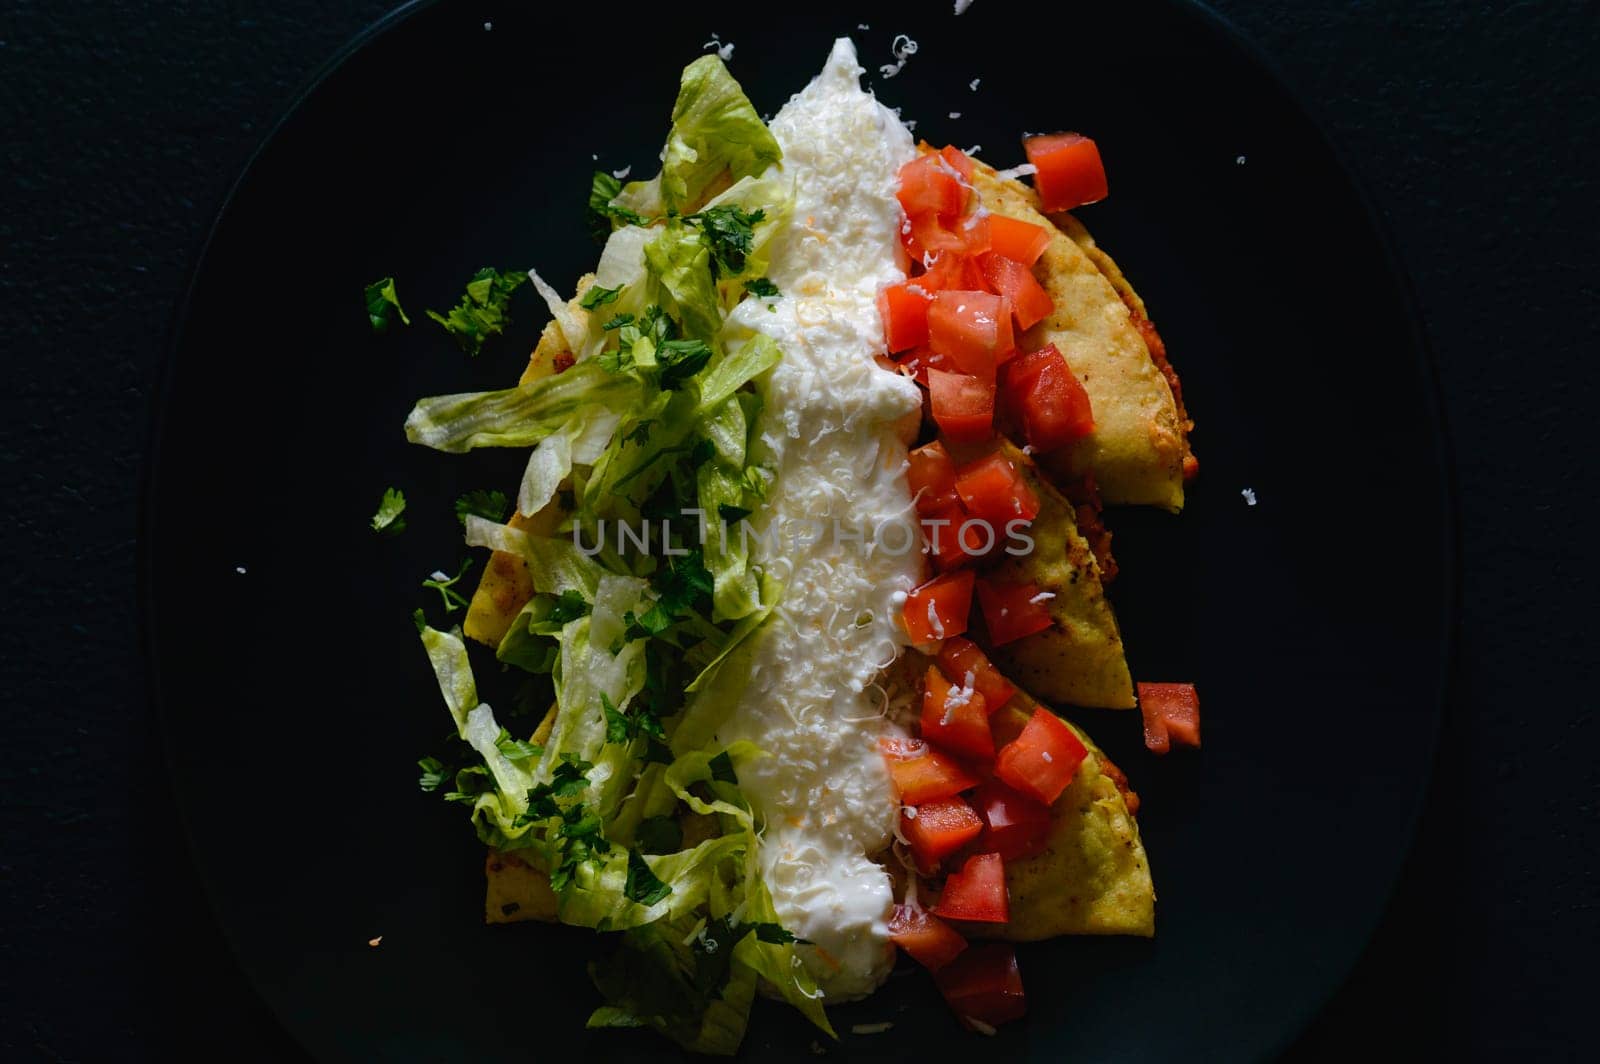 Mashed Potato and Chorizo Tacos Dorados with Toppings by RobertPB